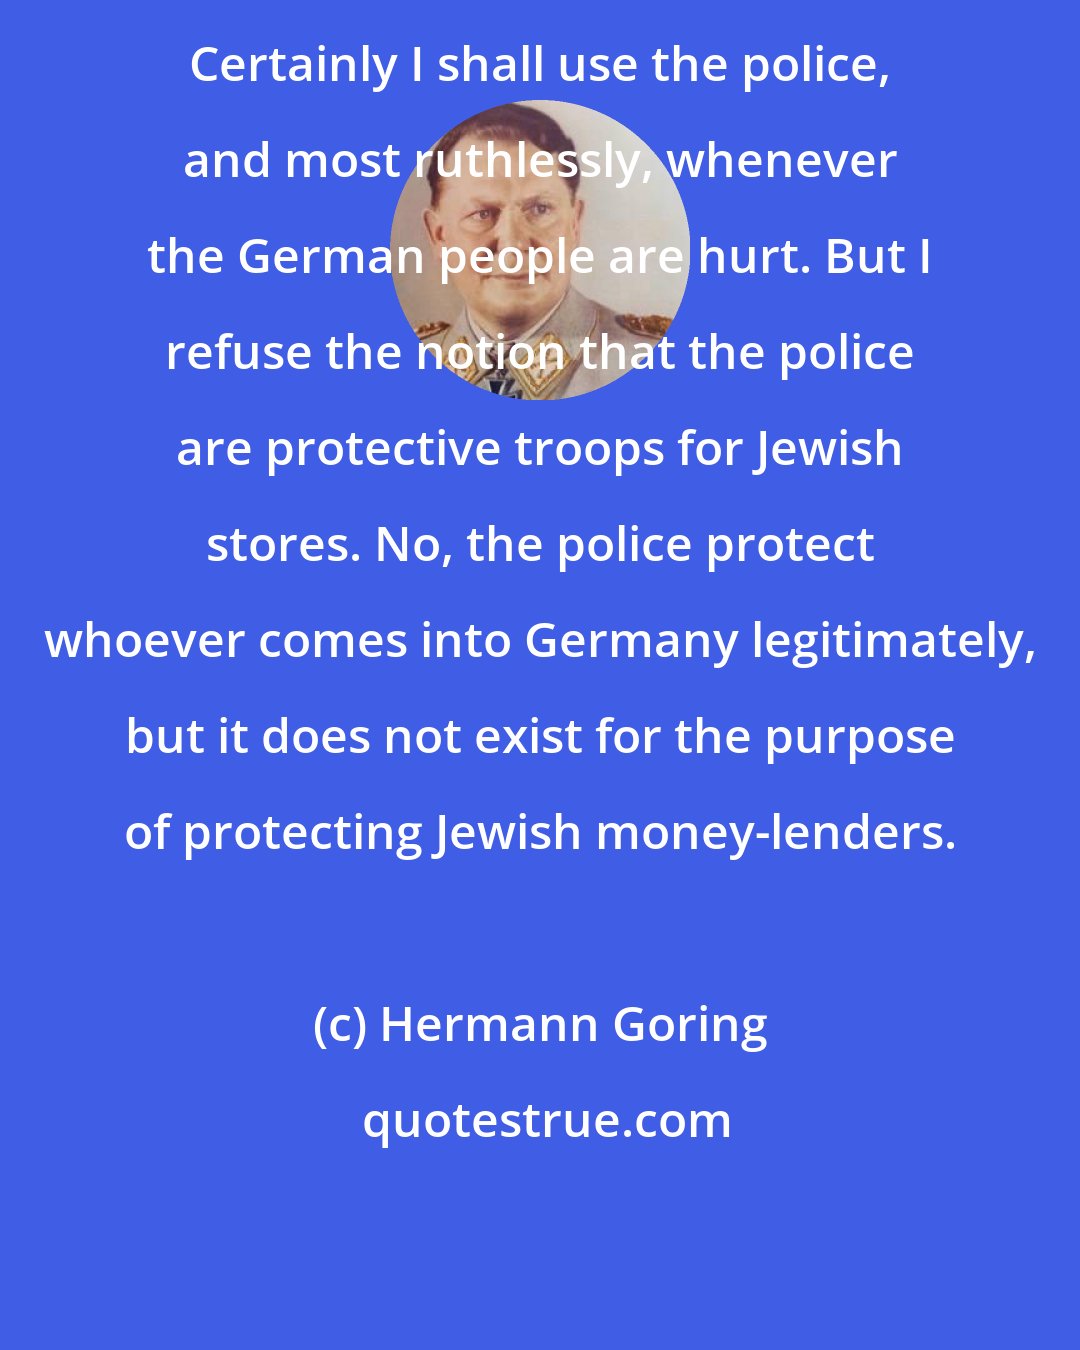 Hermann Goring: Certainly I shall use the police, and most ruthlessly, whenever the German people are hurt. But I refuse the notion that the police are protective troops for Jewish stores. No, the police protect whoever comes into Germany legitimately, but it does not exist for the purpose of protecting Jewish money-lenders.